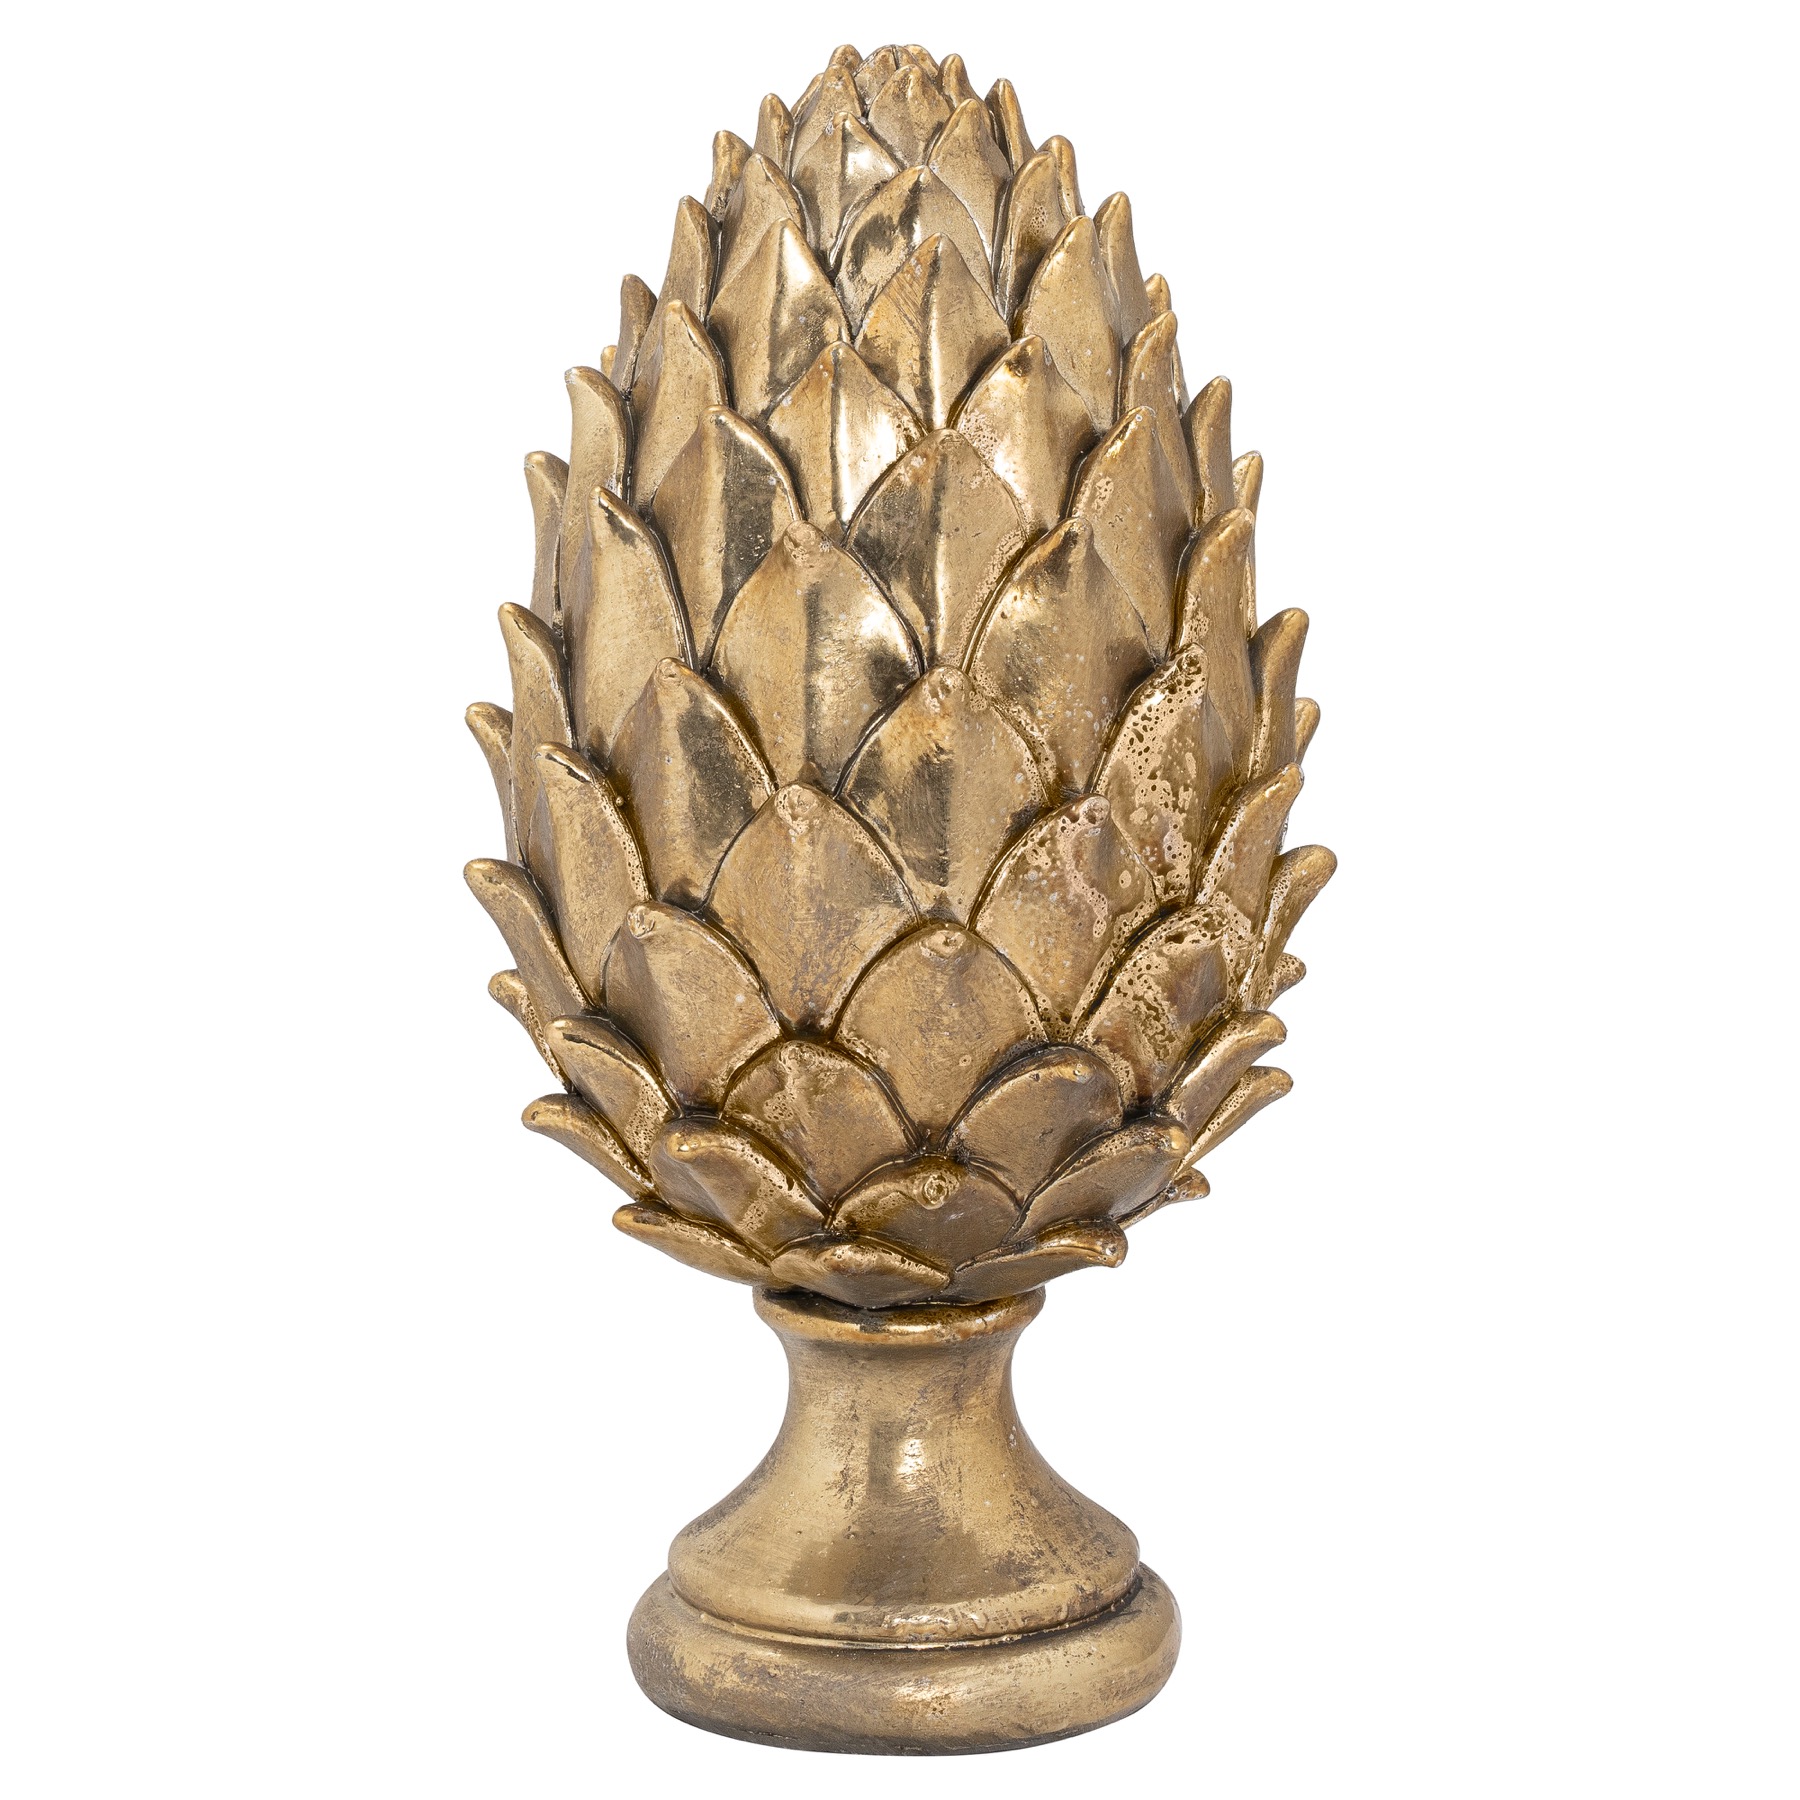 Tall Gold Pinecone Finial - Image 1